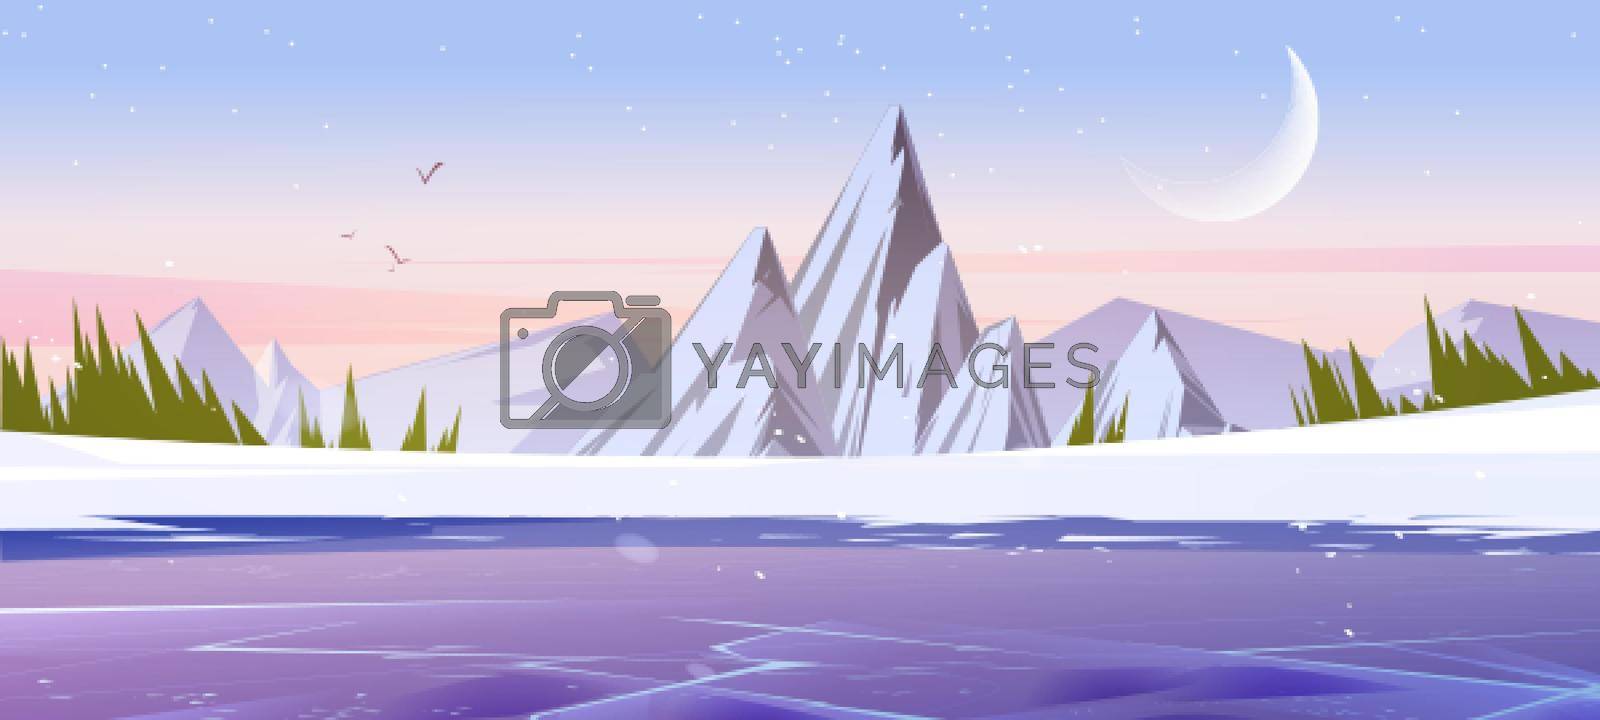 Royalty free image of Winter mountains landscape, nature background by vectorart